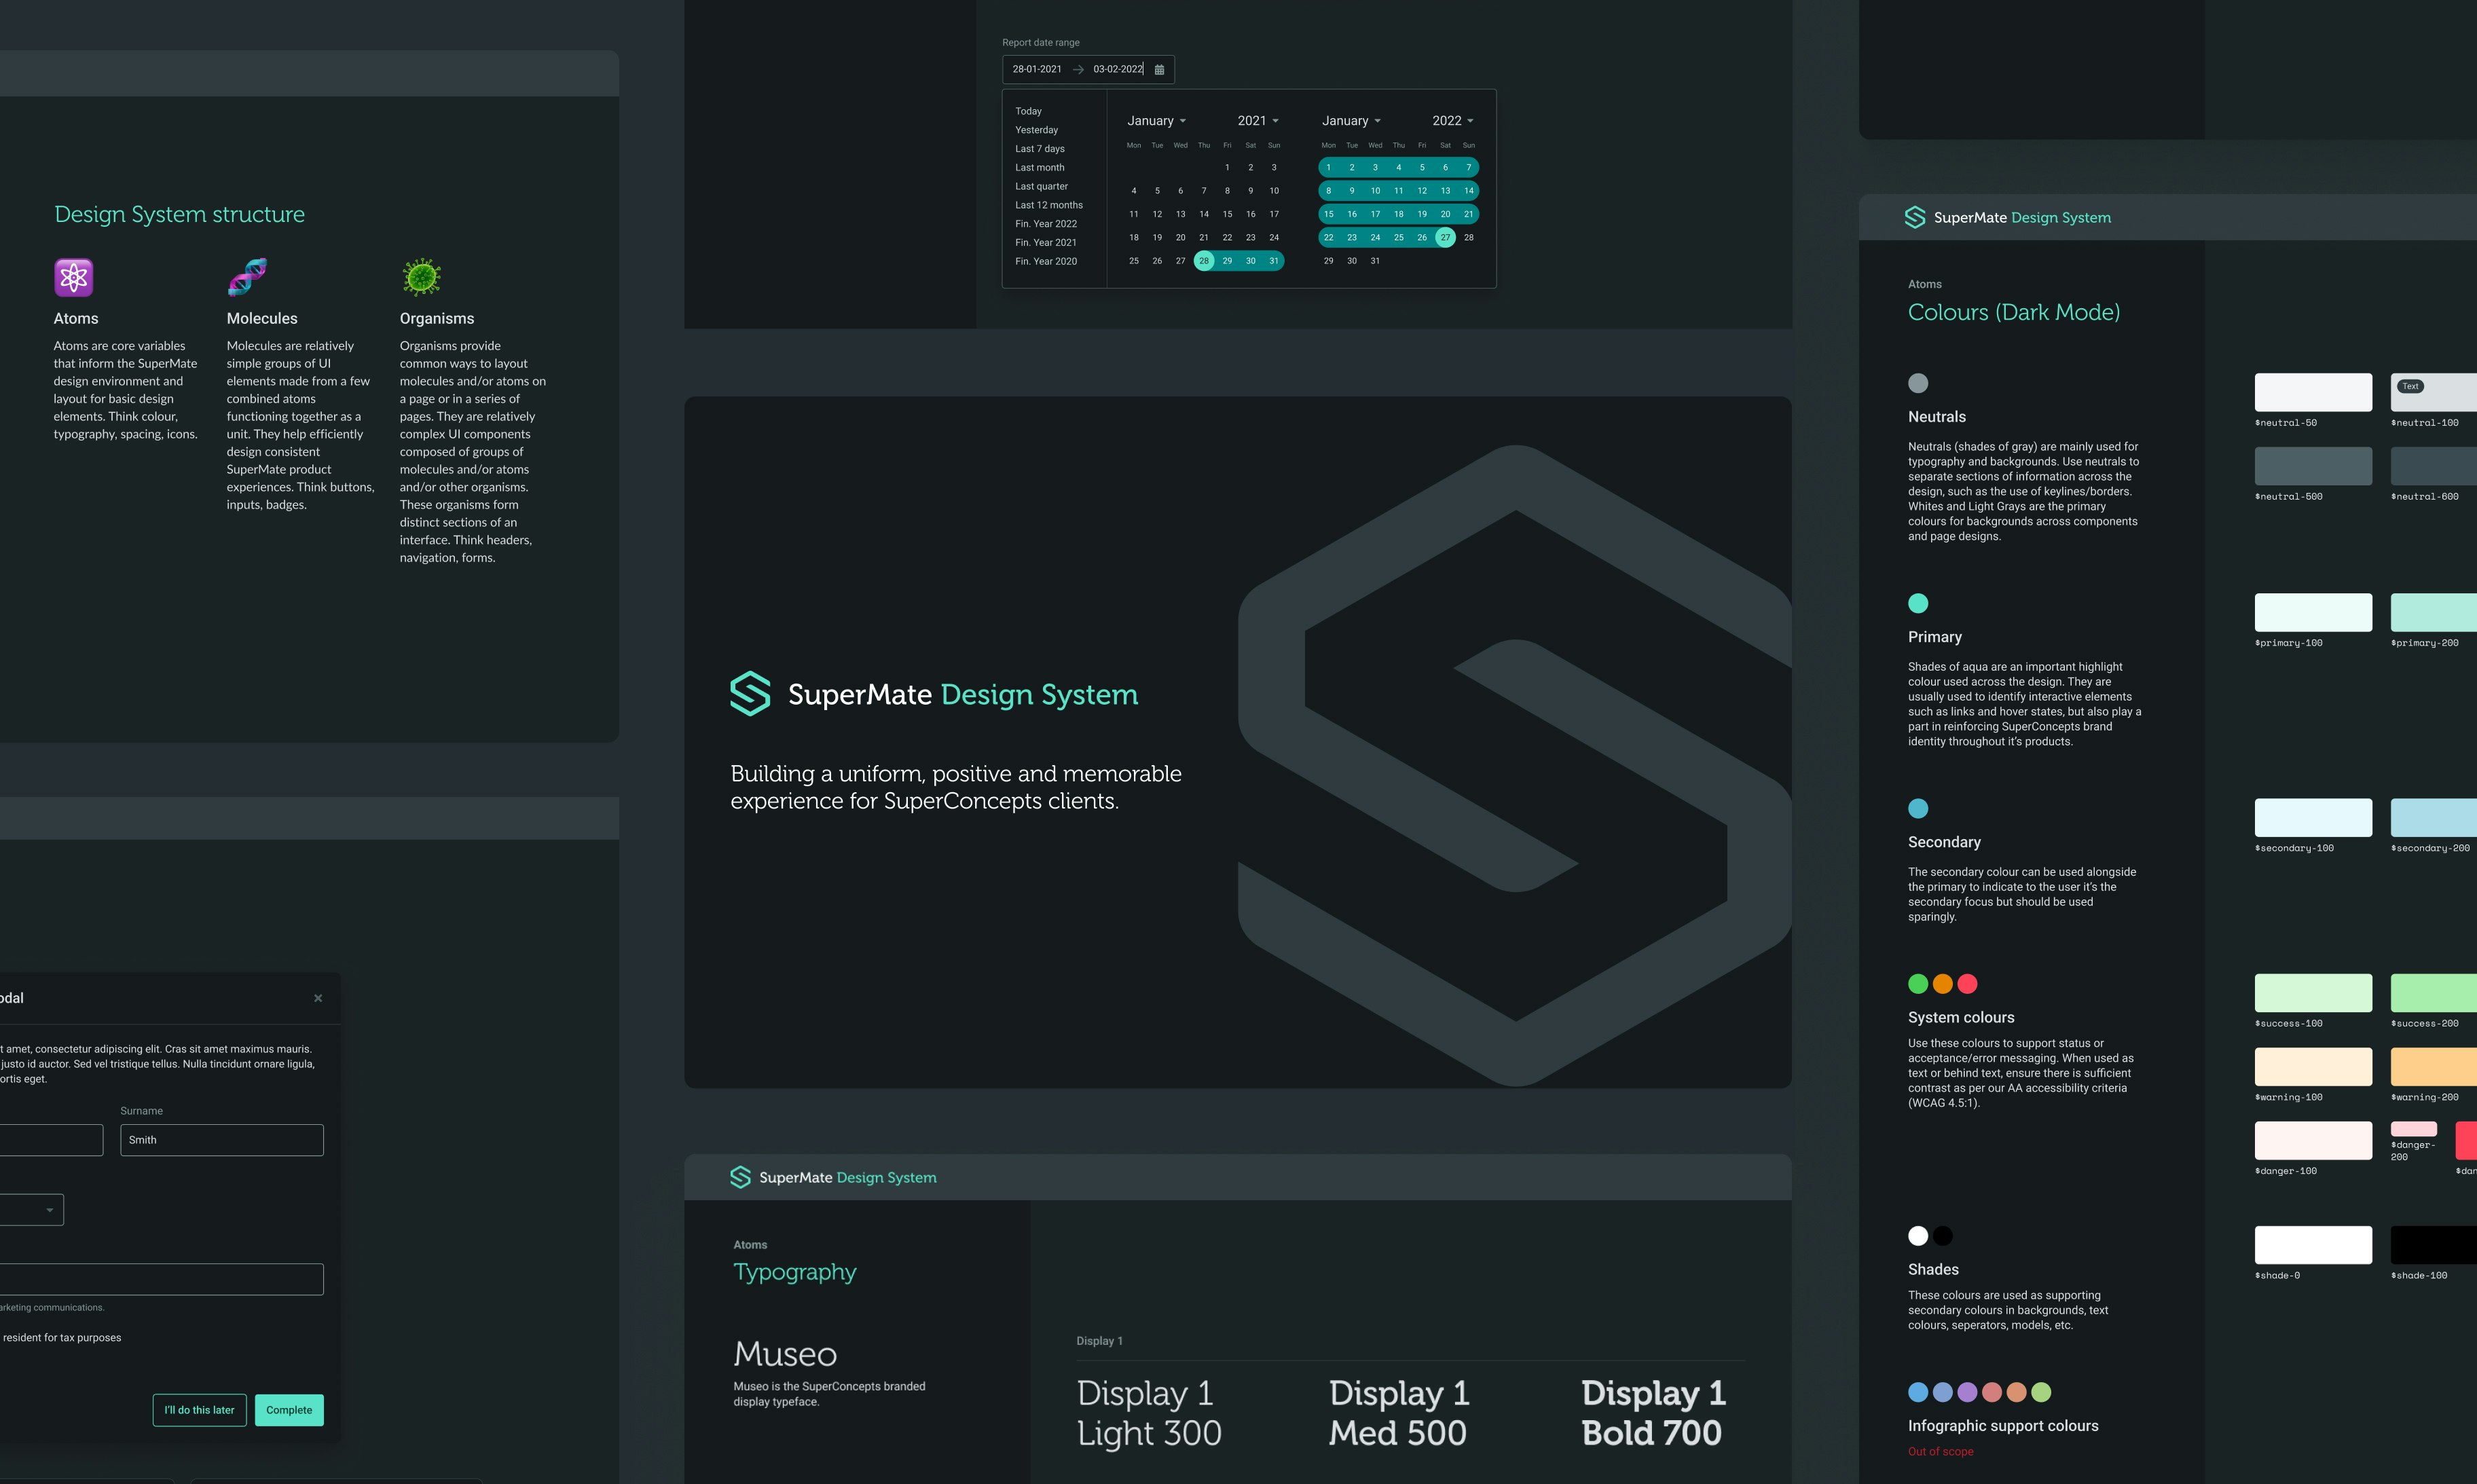 SuperMate Design System feature tile with many pages from the design system in dark mode